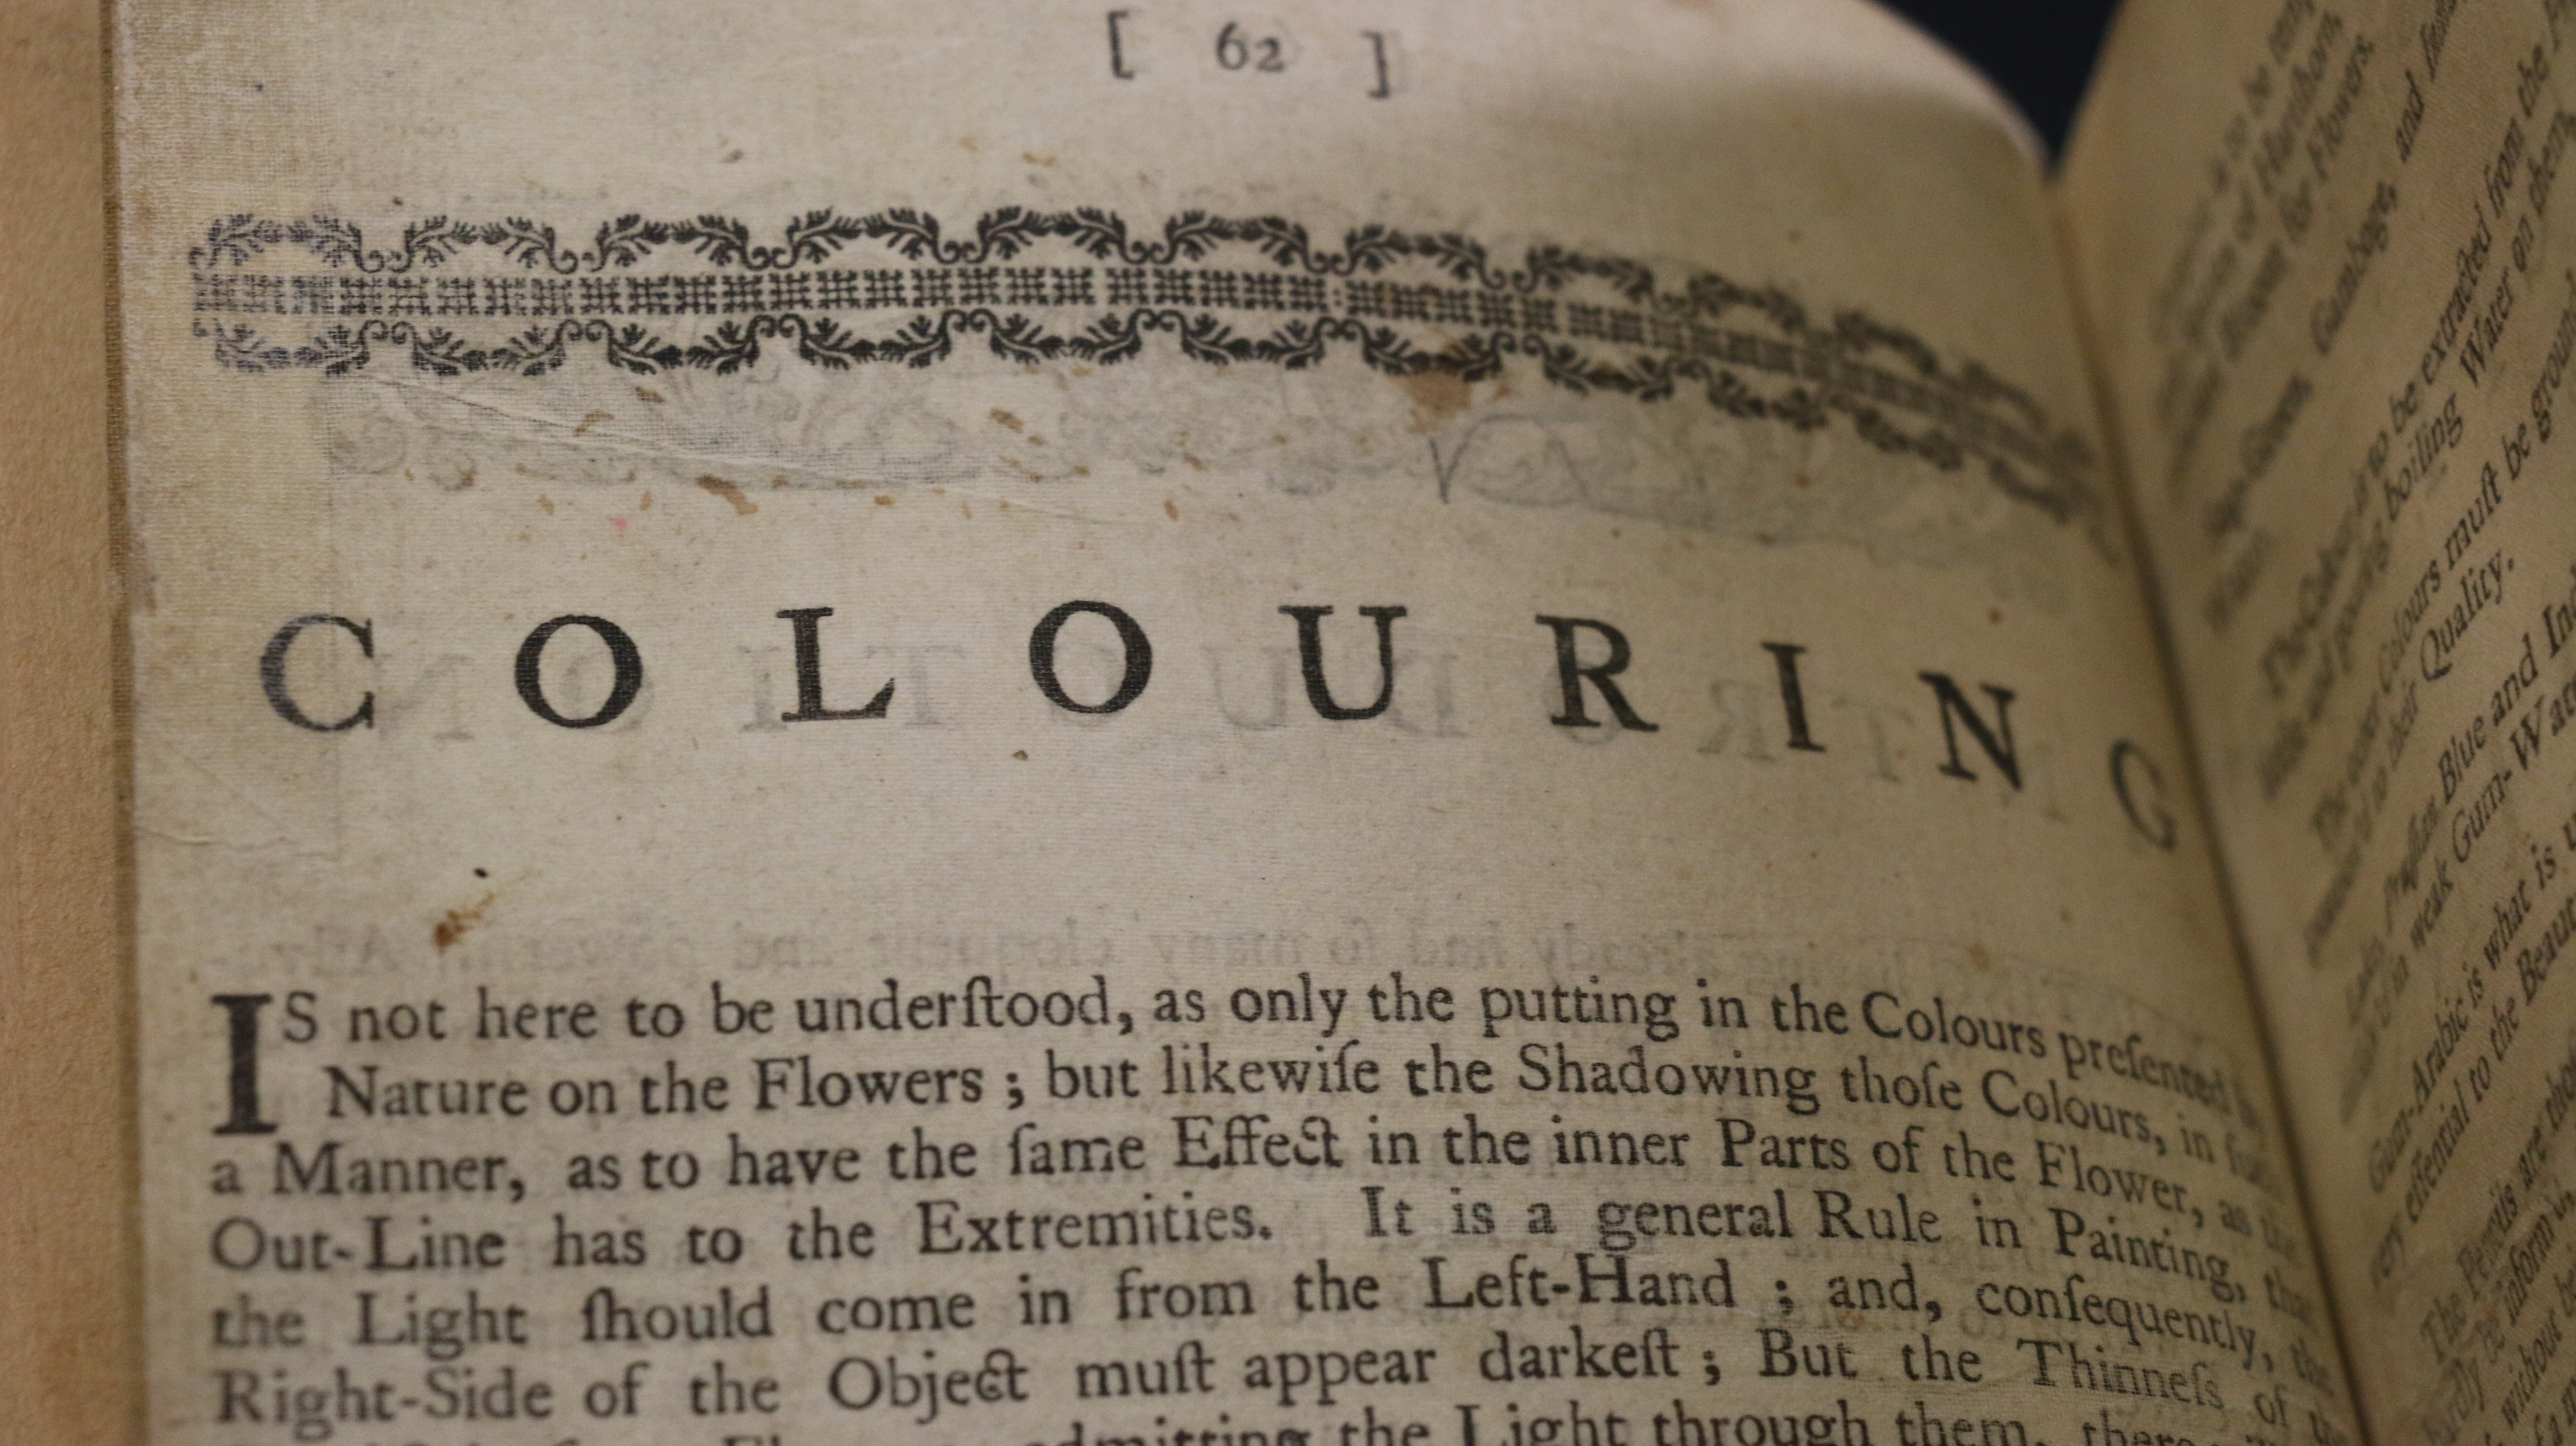 18th Century Coloring Book Discovered at the Missouri Botanical Garden